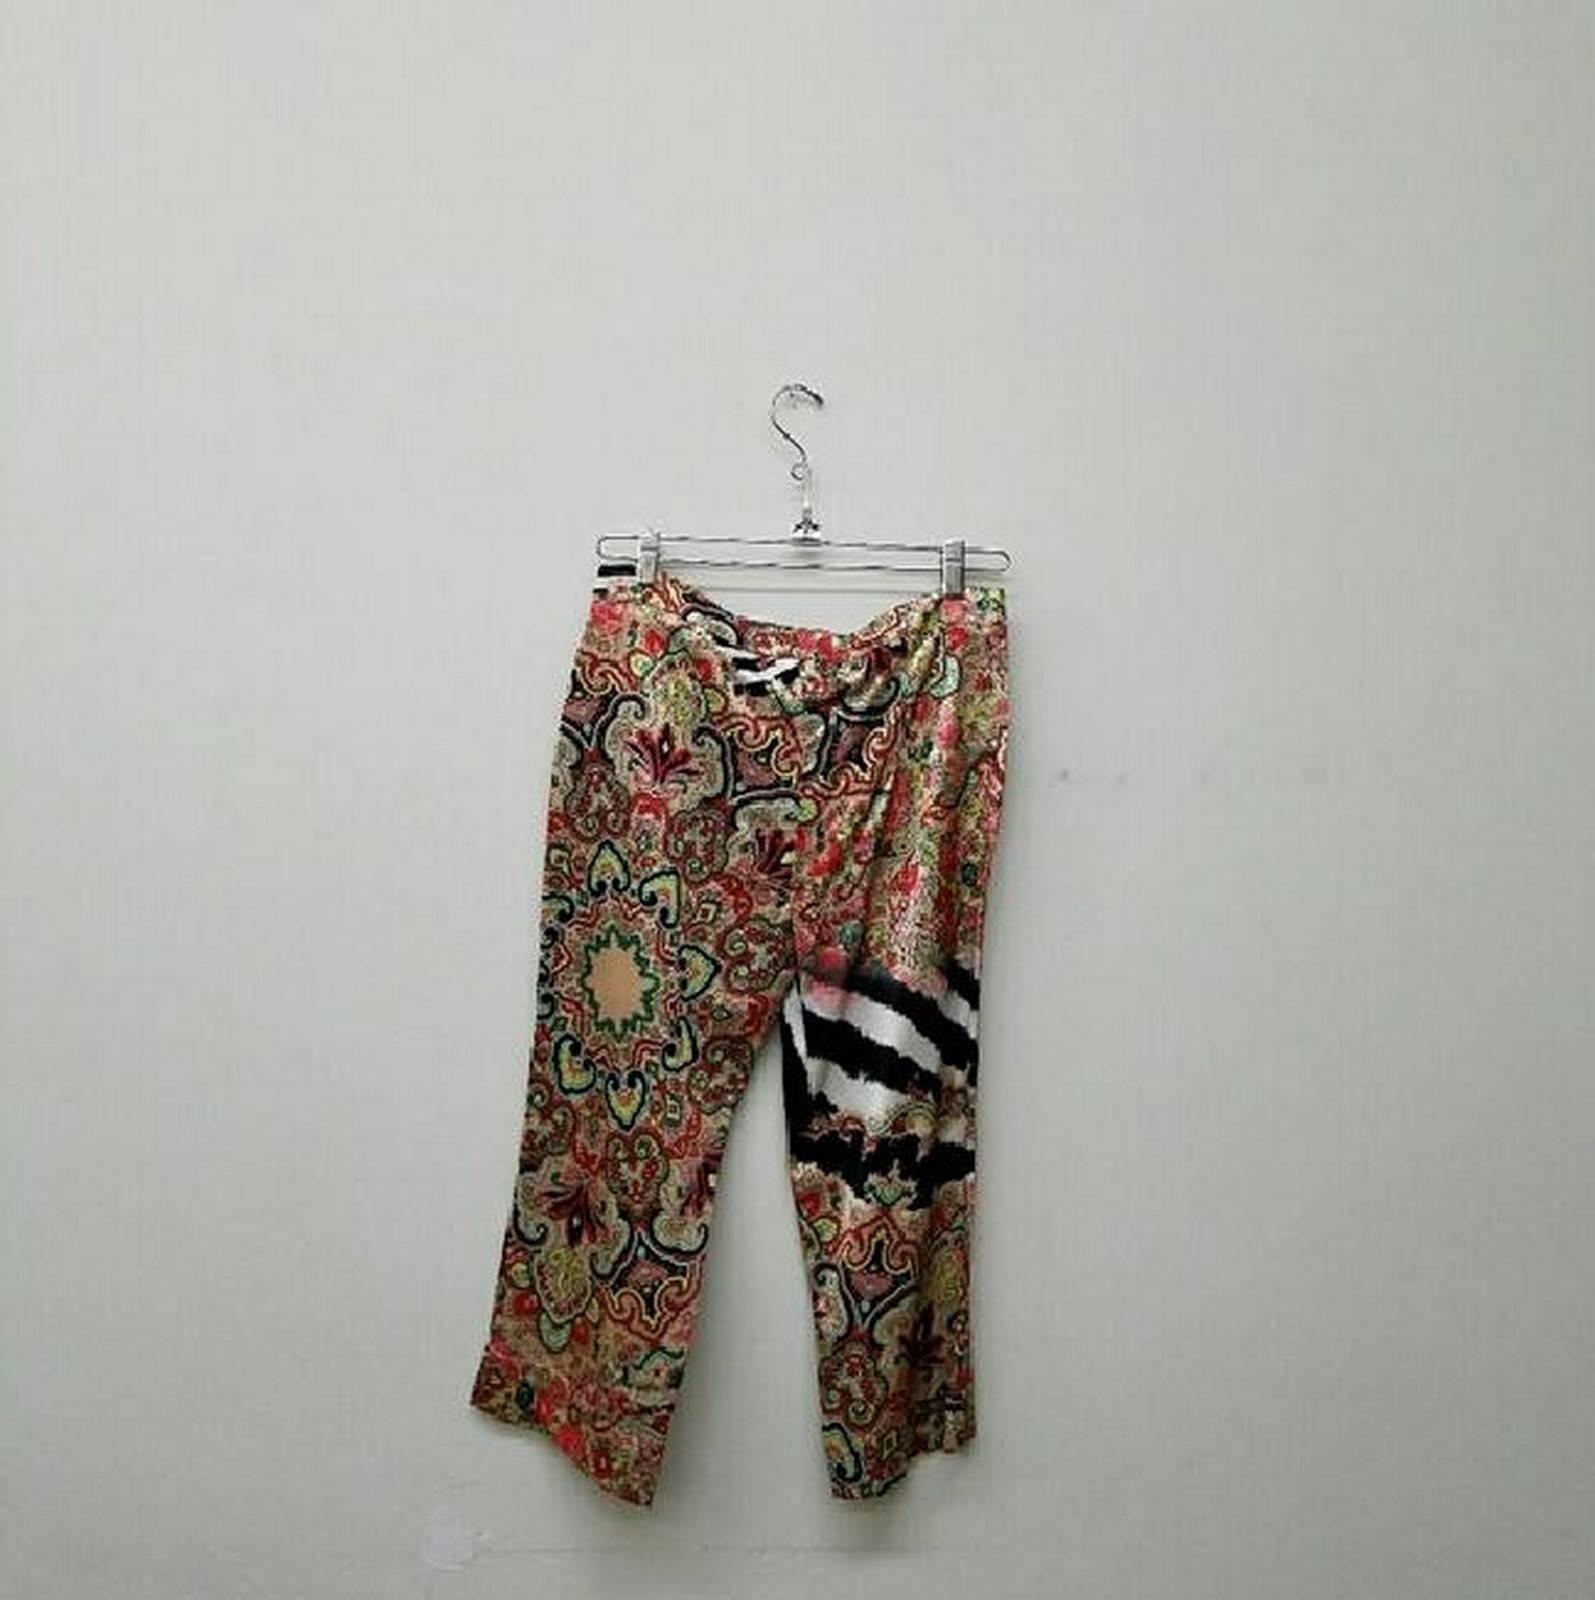 Roberto Cavalli Class Capri Shorts

Brand new. Never used. Tags still attached.

Type:Shorts
Size:8 (M, 29, 30)
Color:multicolor
Brand:Roberto Cavalli
Style/Collection:Roberto Cavalli Class Multi Color Capri